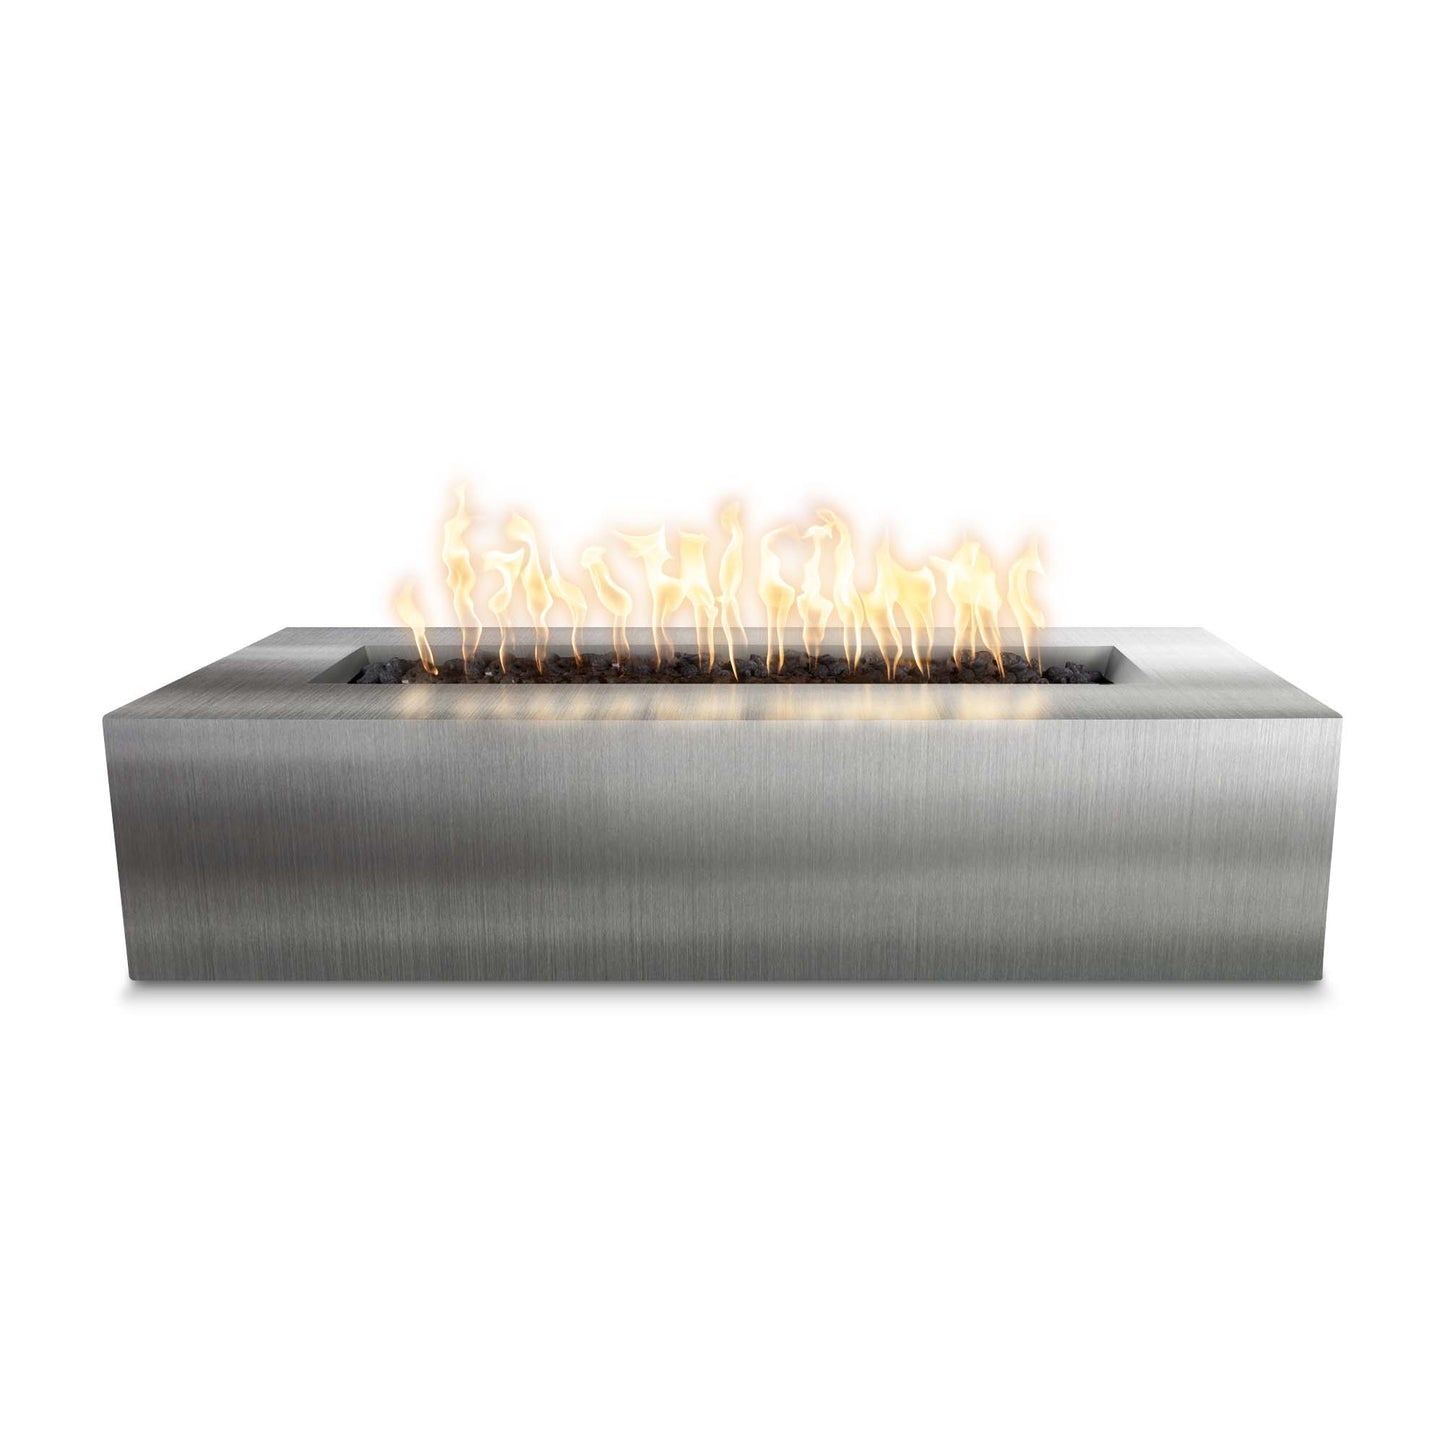 Regal Metal Fire Pit 54" - Electronic Ignition